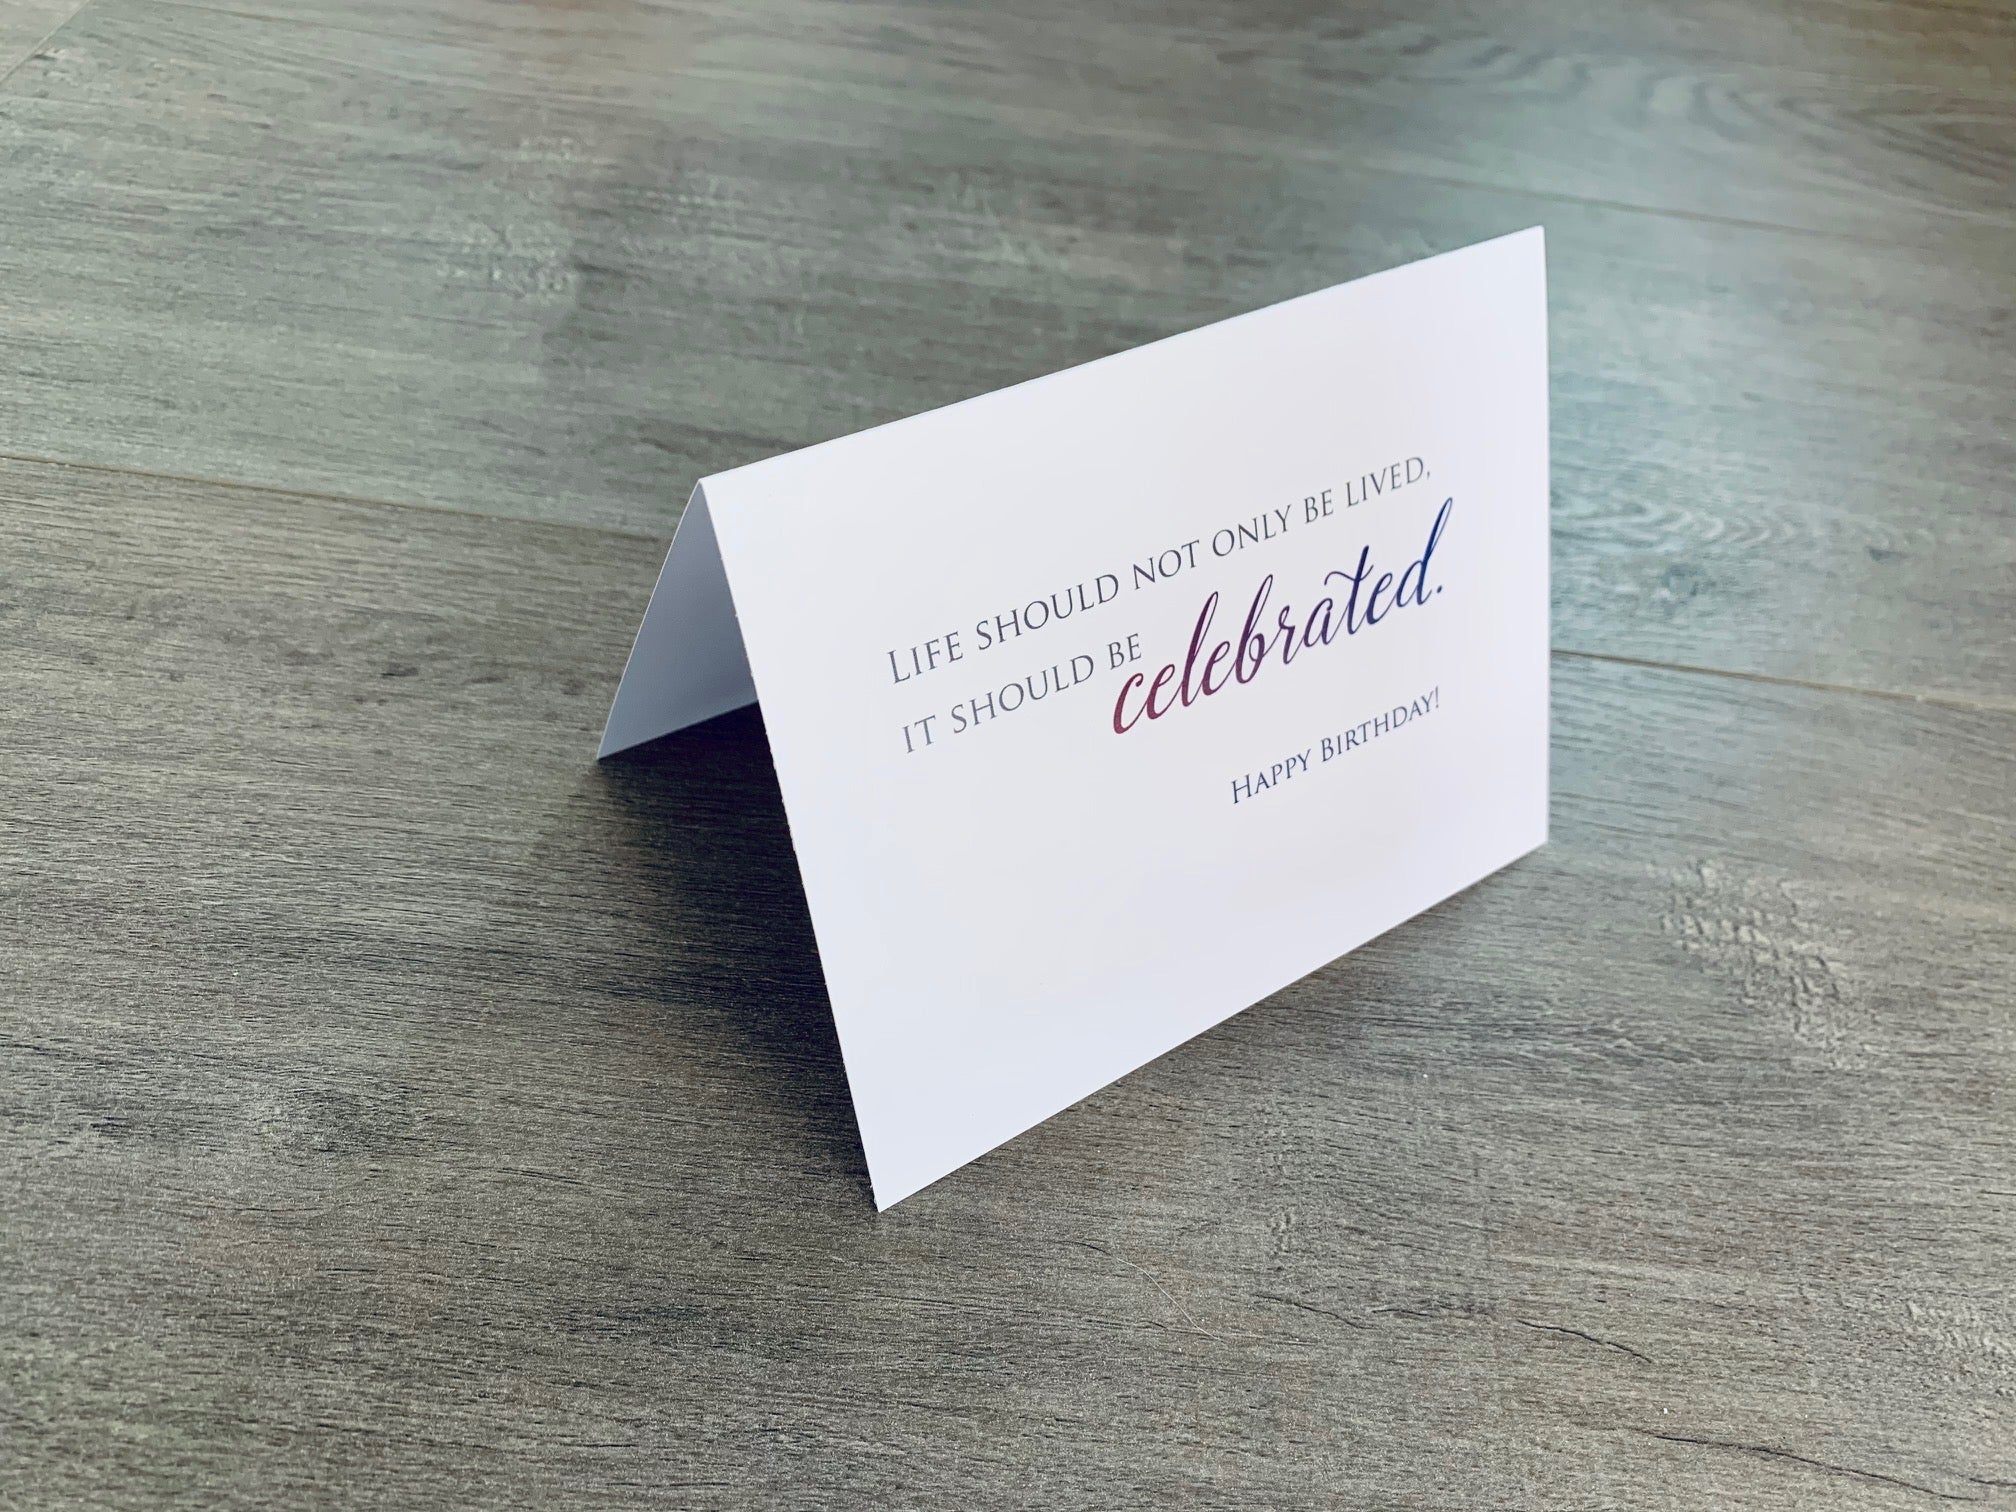 A white card is propped on a gray wood floor. The card reads, "Life should not only be lived, it should be celebrated." Birthday card by Stationare.